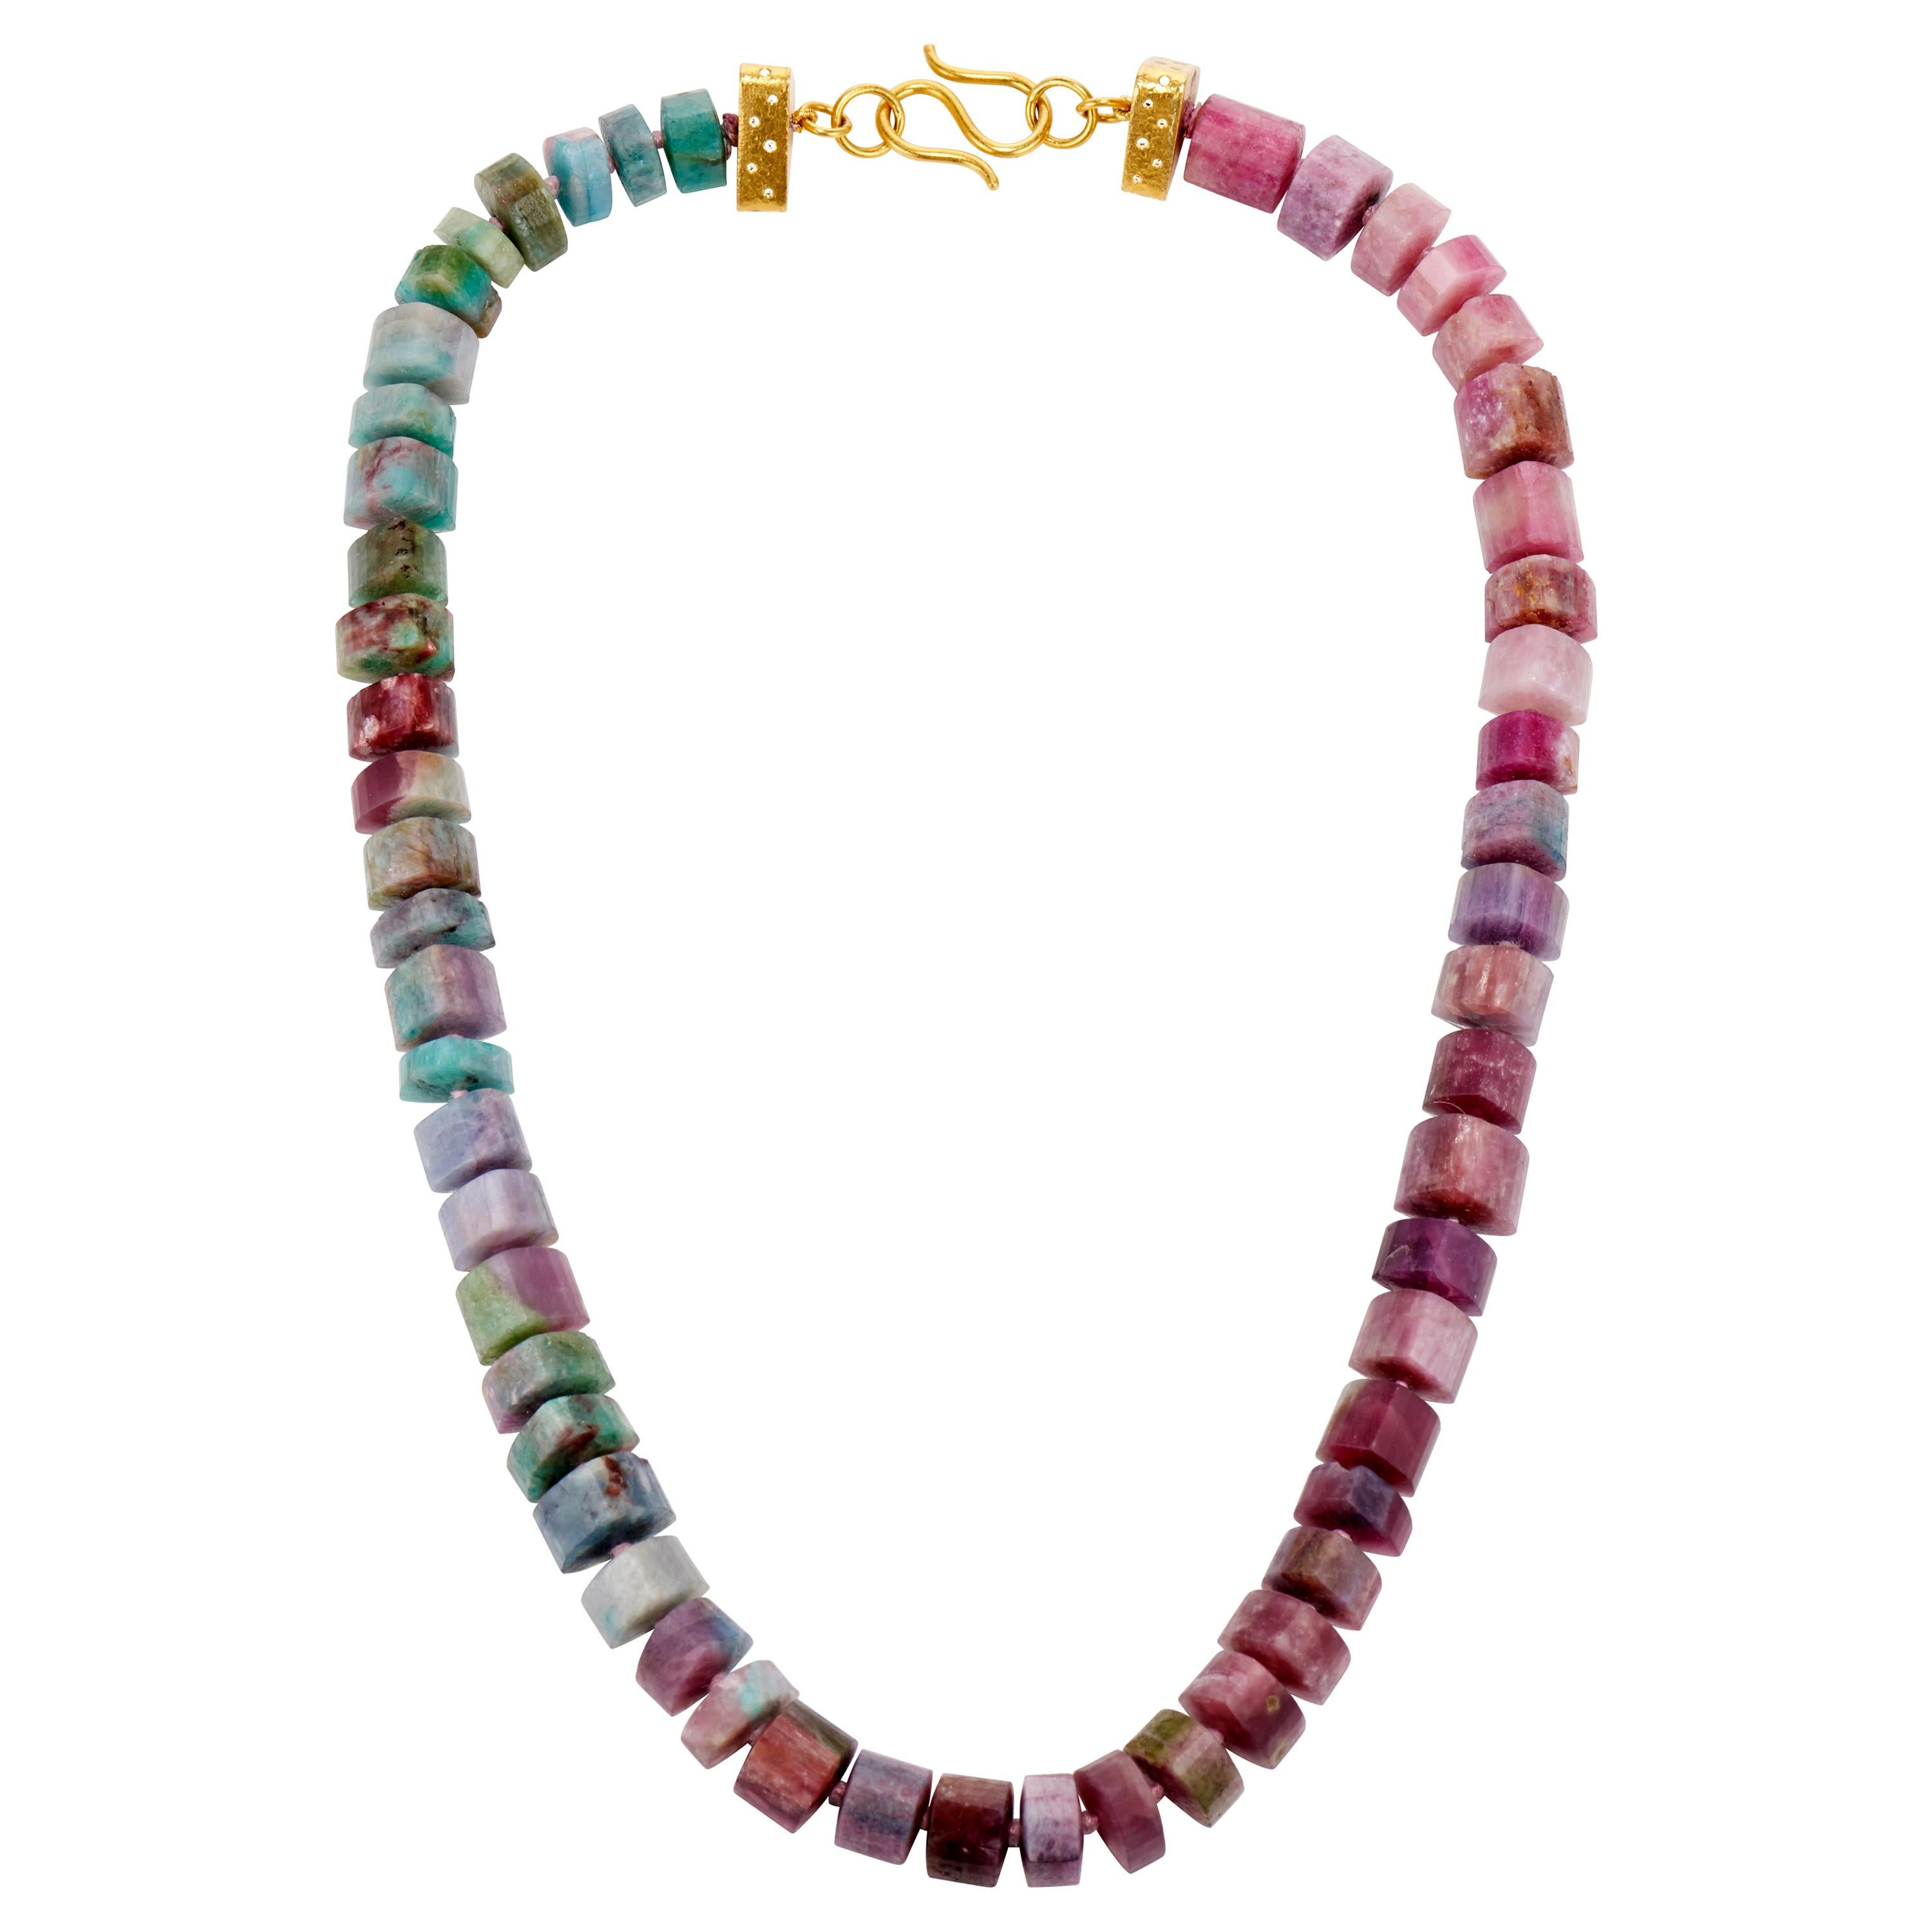 Multicolored beaded necklace